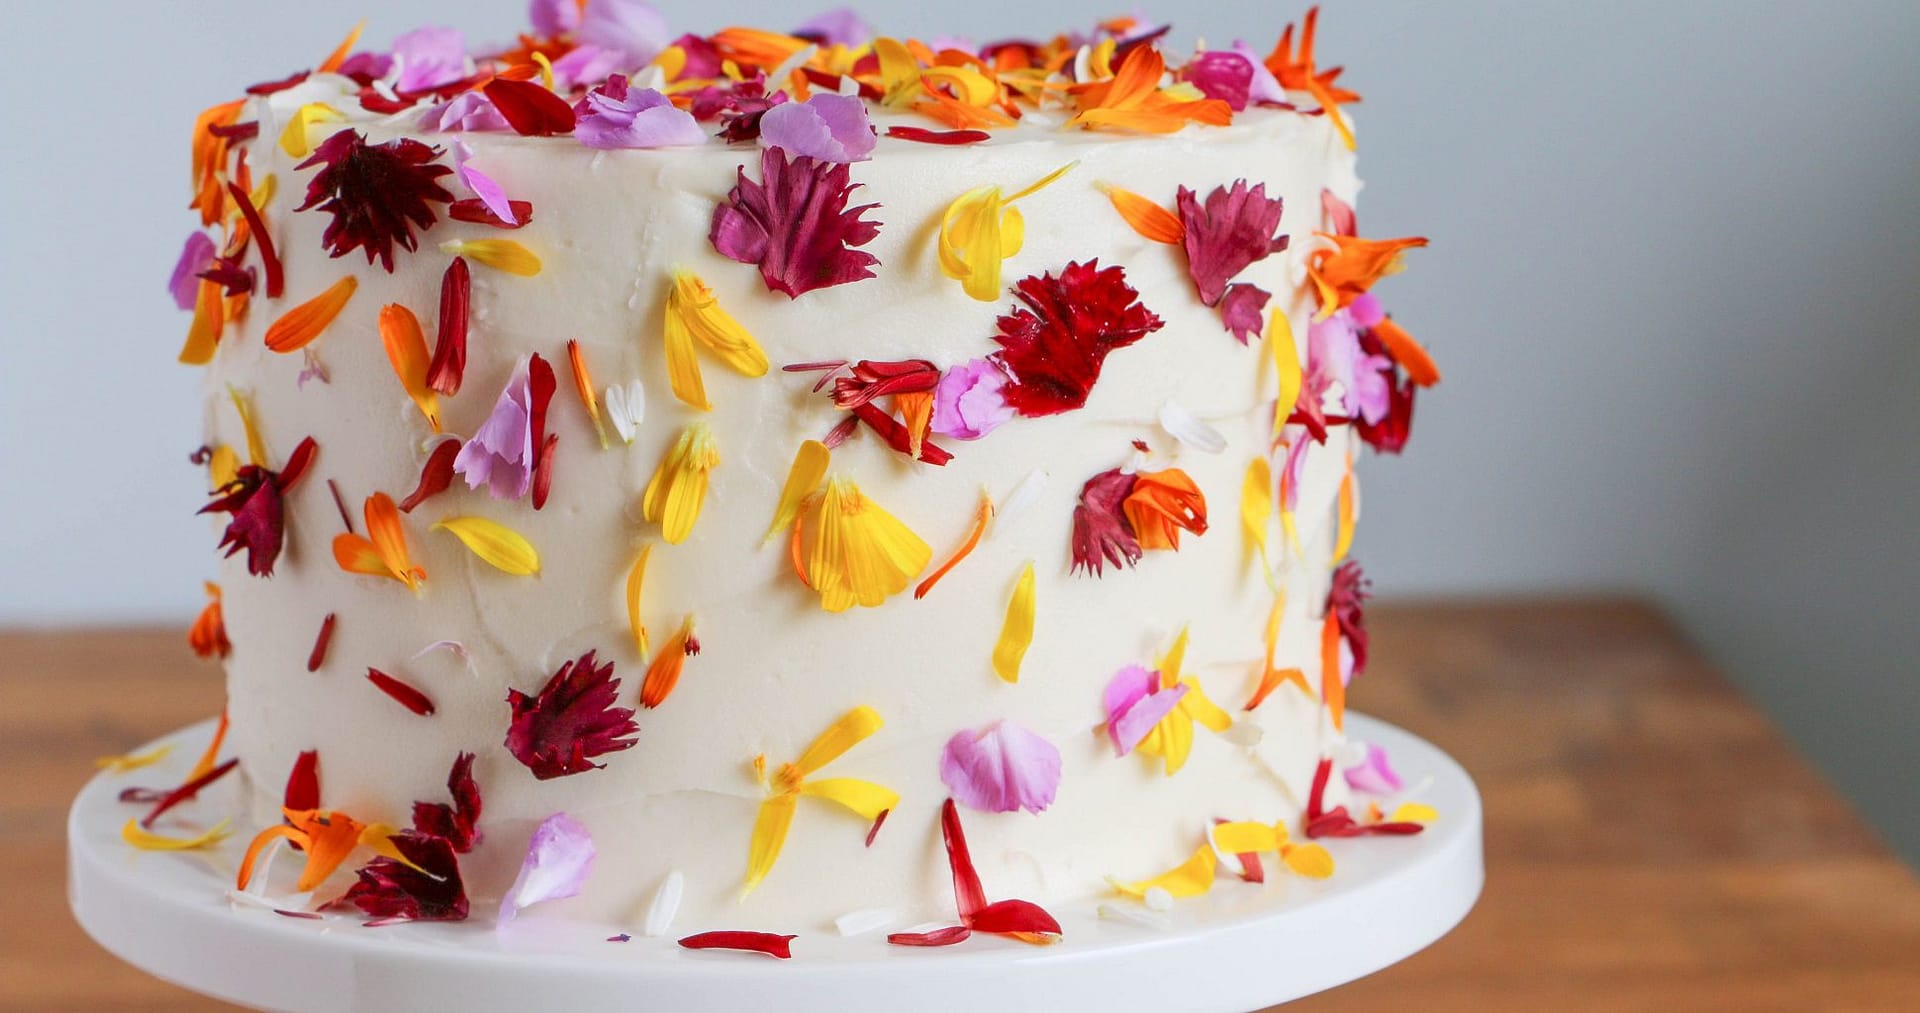 25 Edible Flowers For Cakes